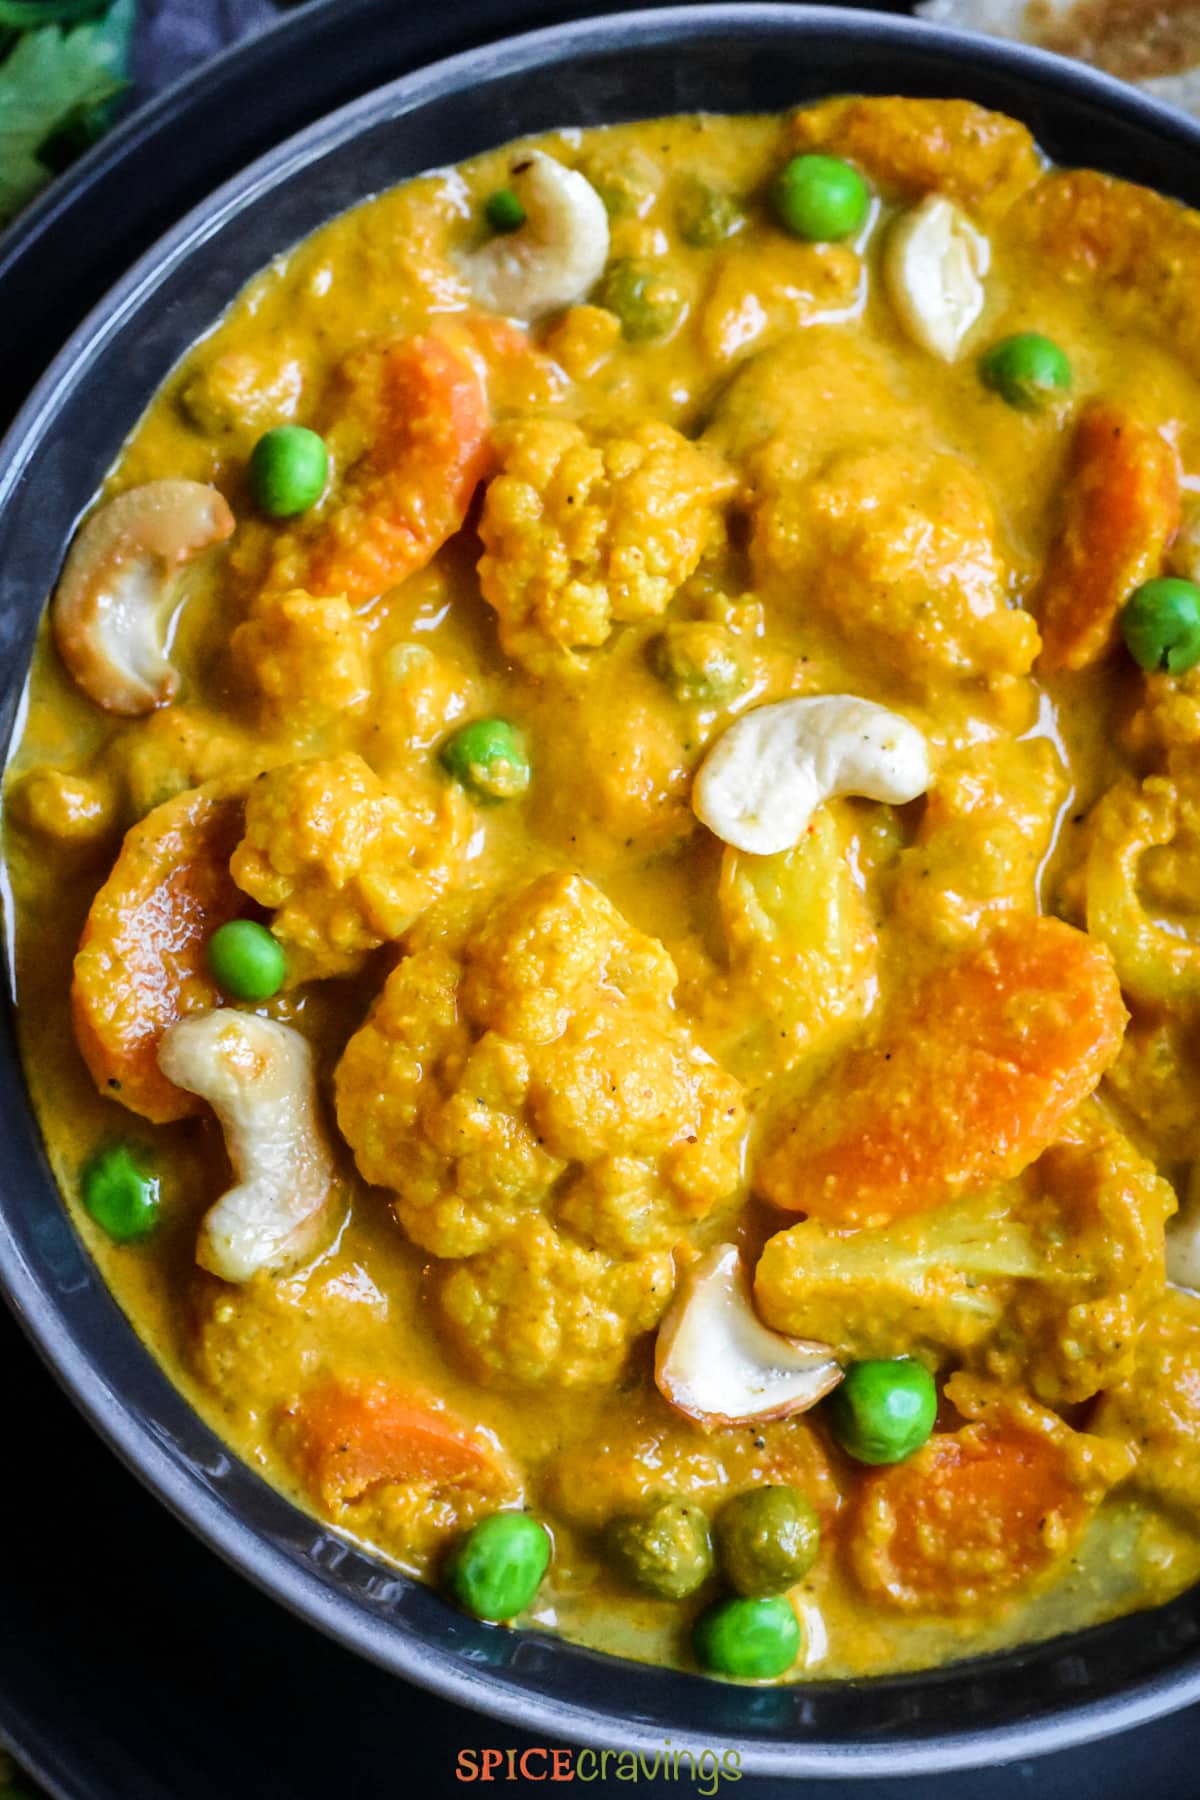 cauliflower, carrots, peas and cashew in korma curry in bowl